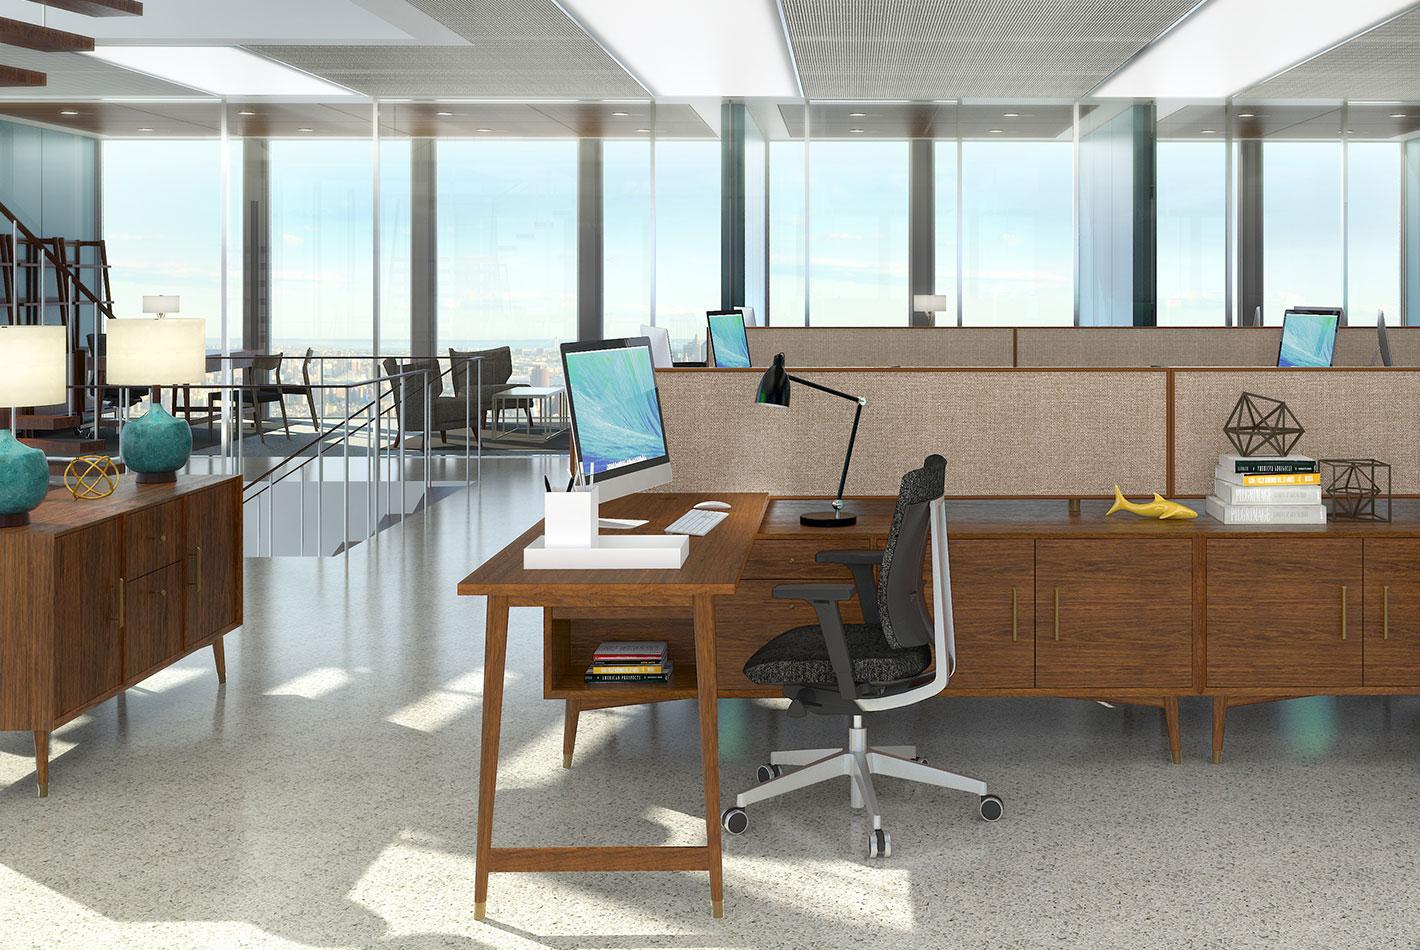 VMAD rendering of an office space outfitted with its collection of office furniture